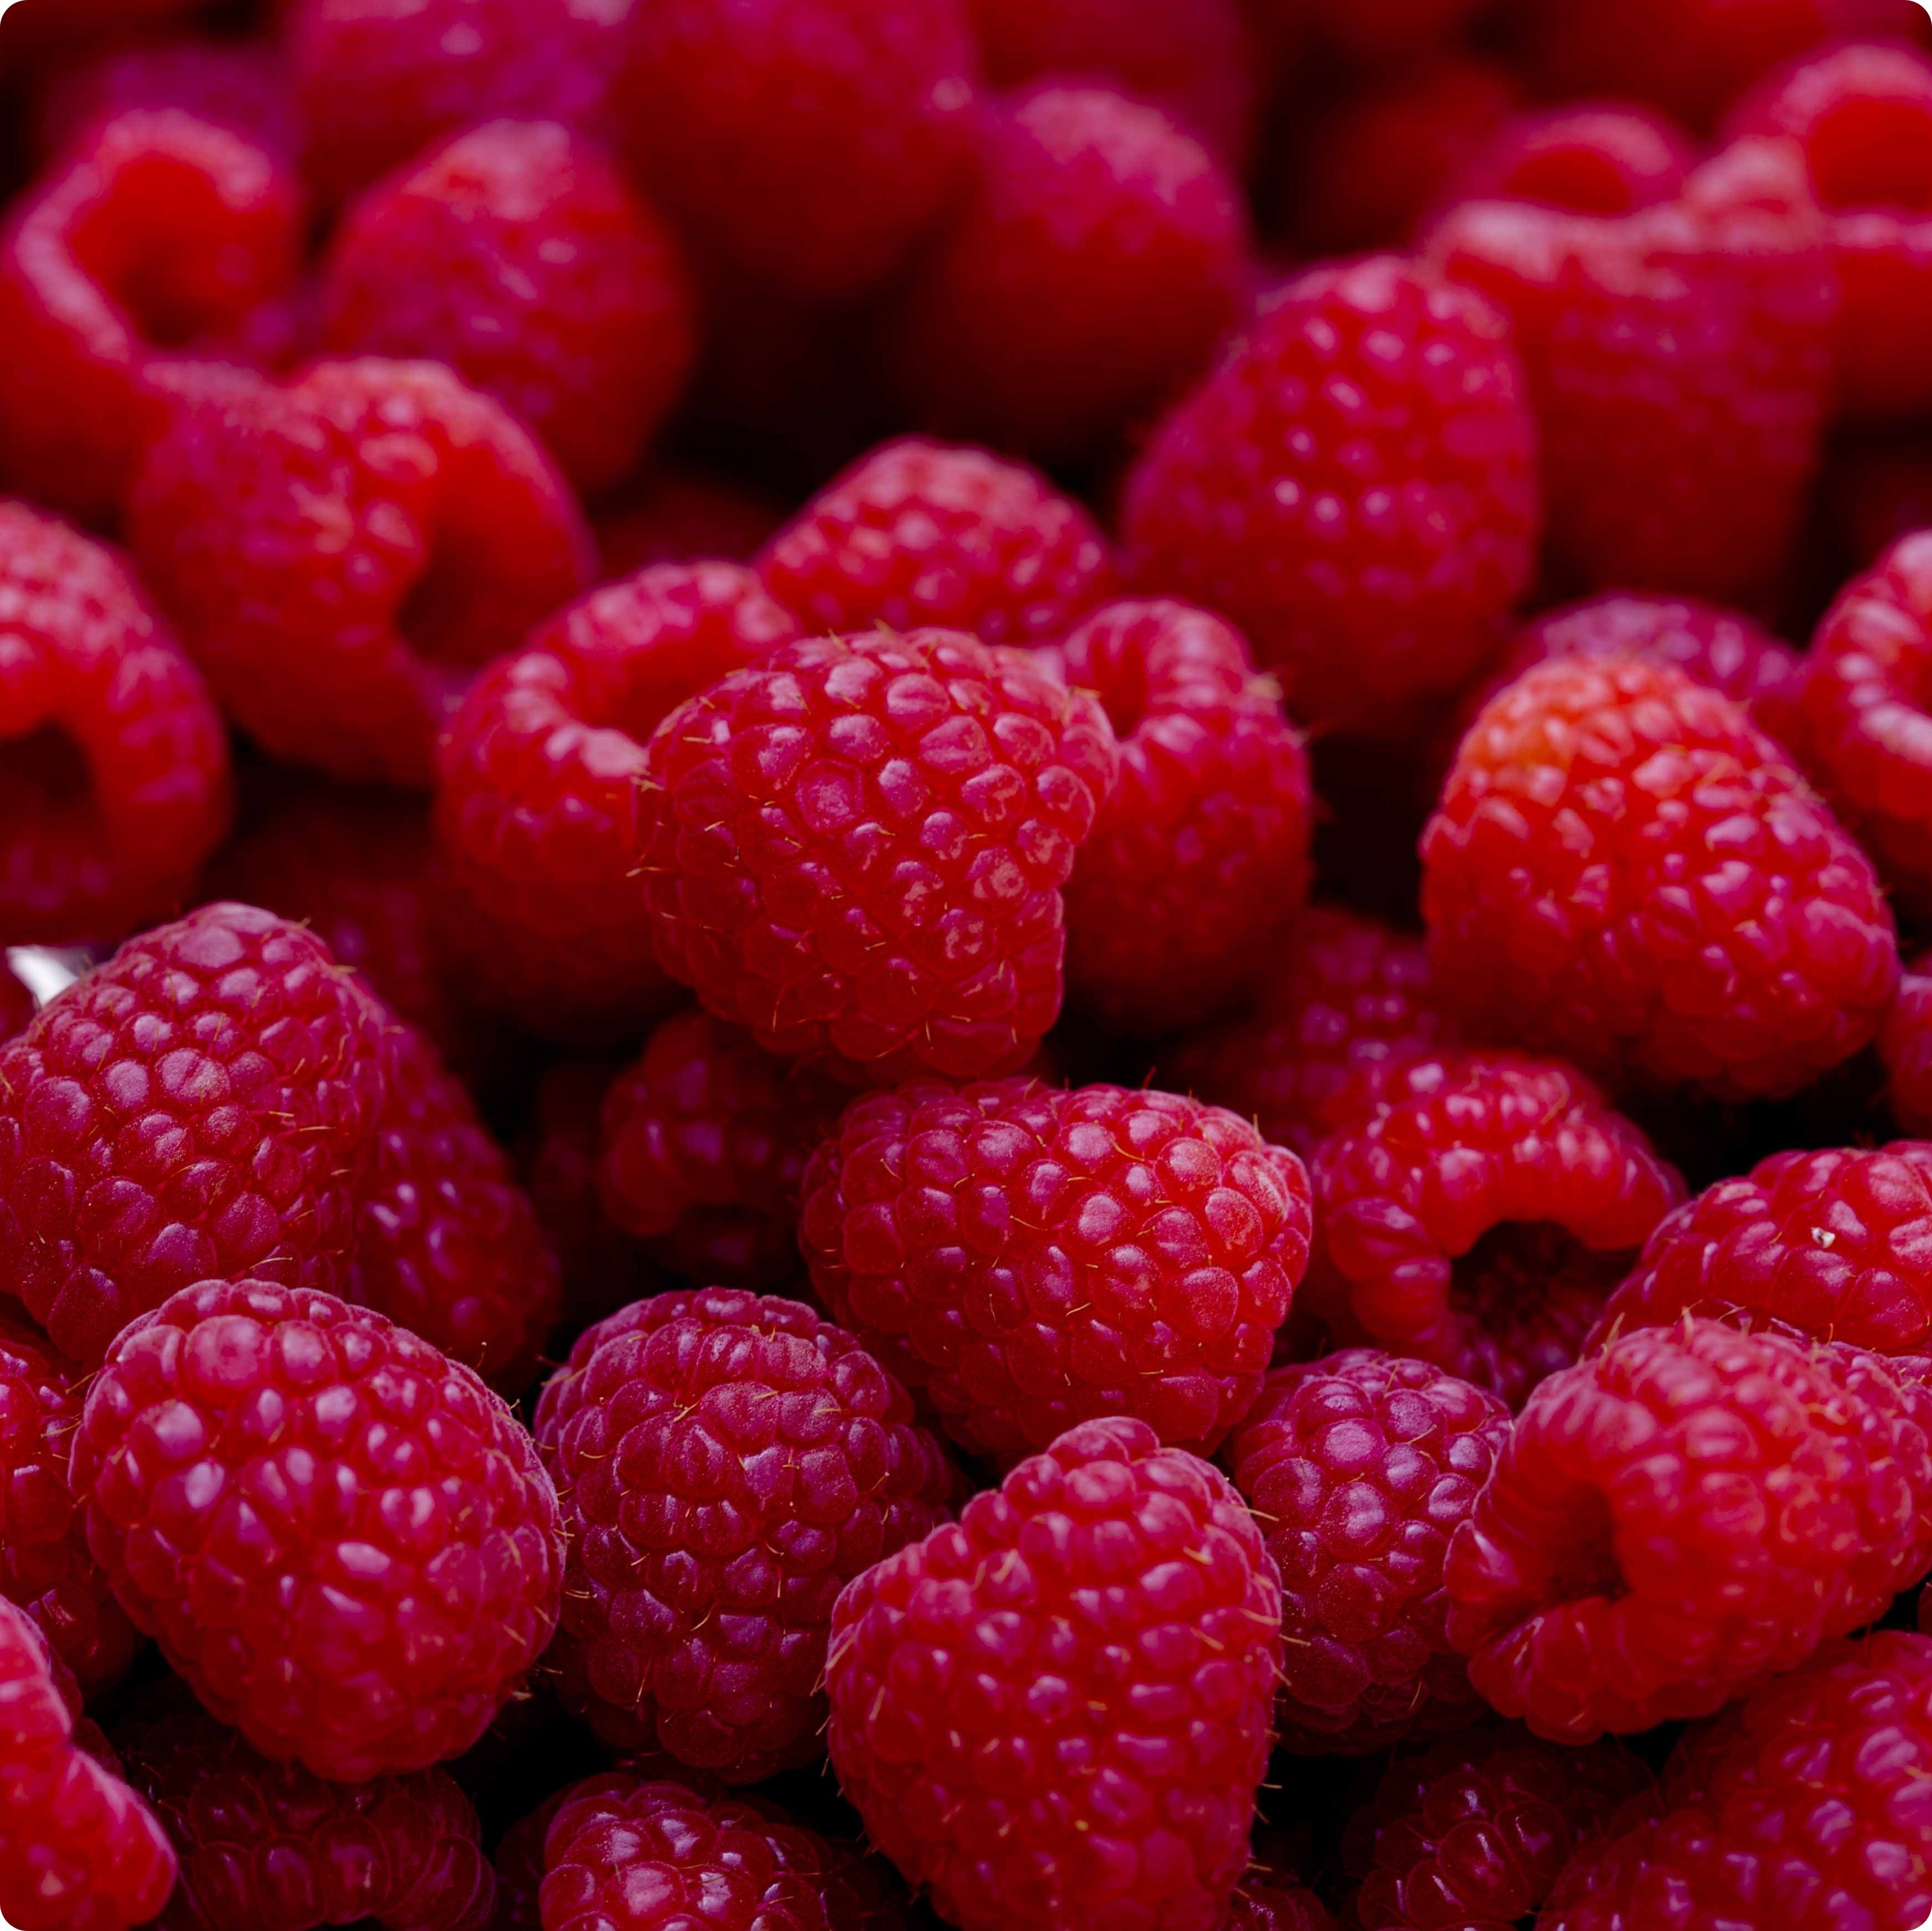 Shop for Raspberry Canes at The Incredible Seed Company Ltd.: Heirloom